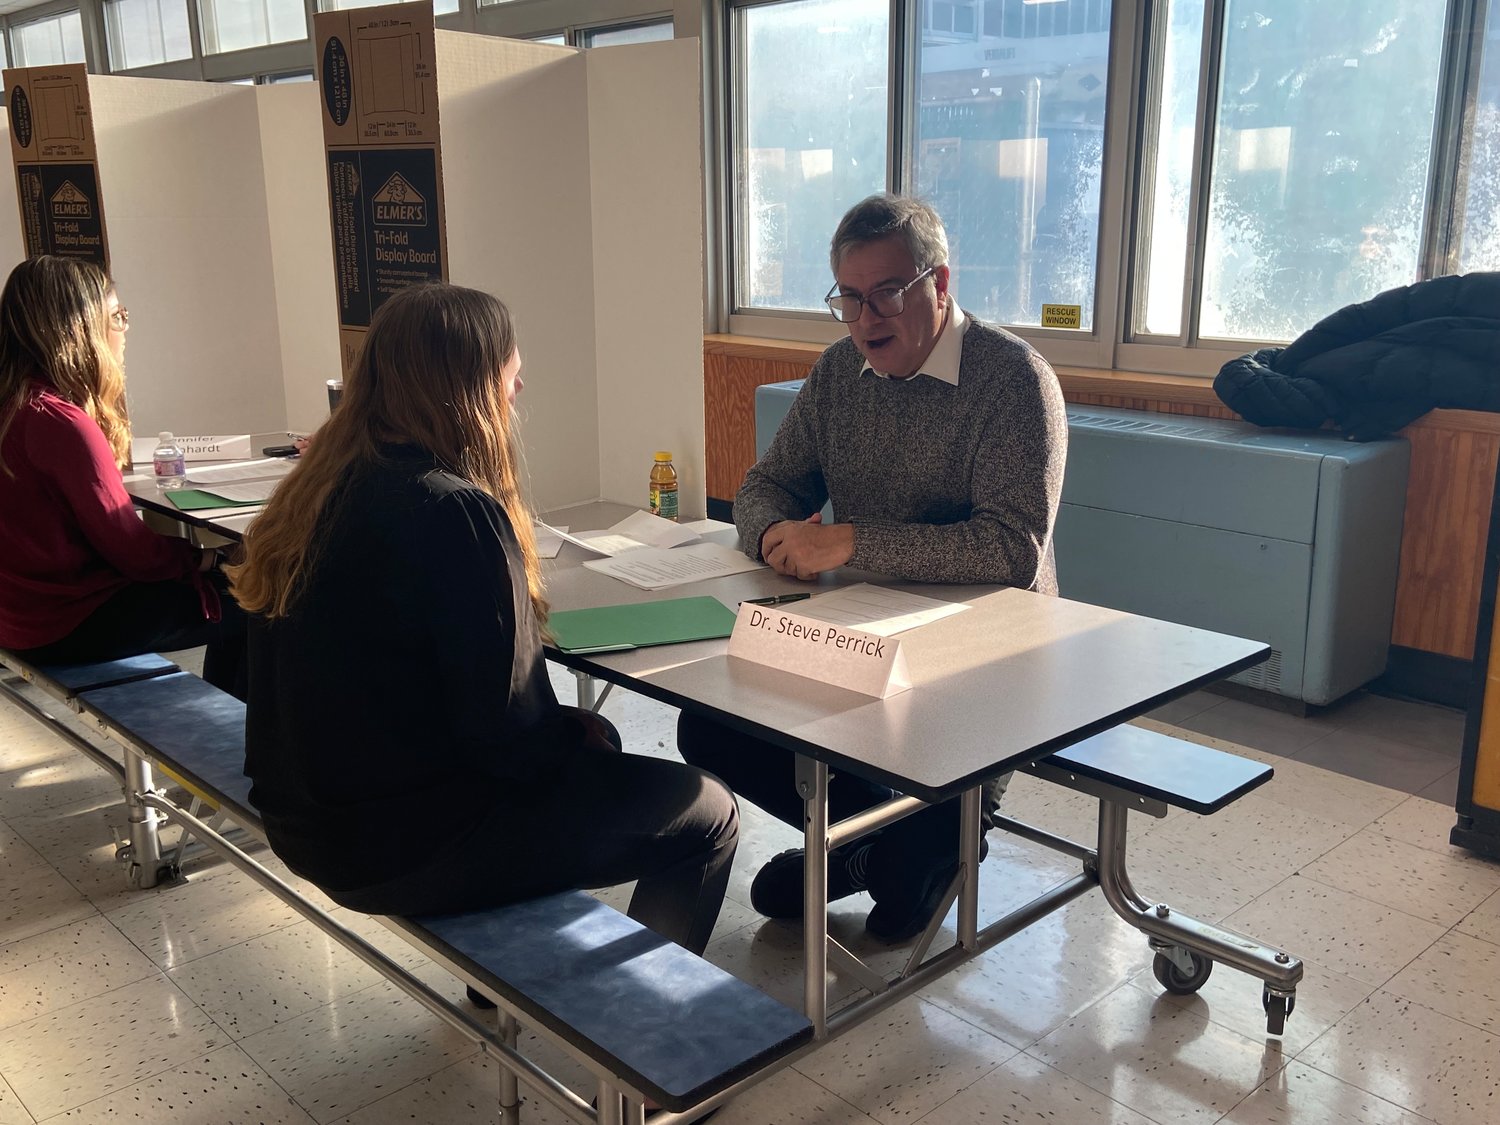 Dr. Steve Perrick interviewed a student in the district’s Academy of Finance program as part of the chamber’s Millie Jones mock interview event on March 3.